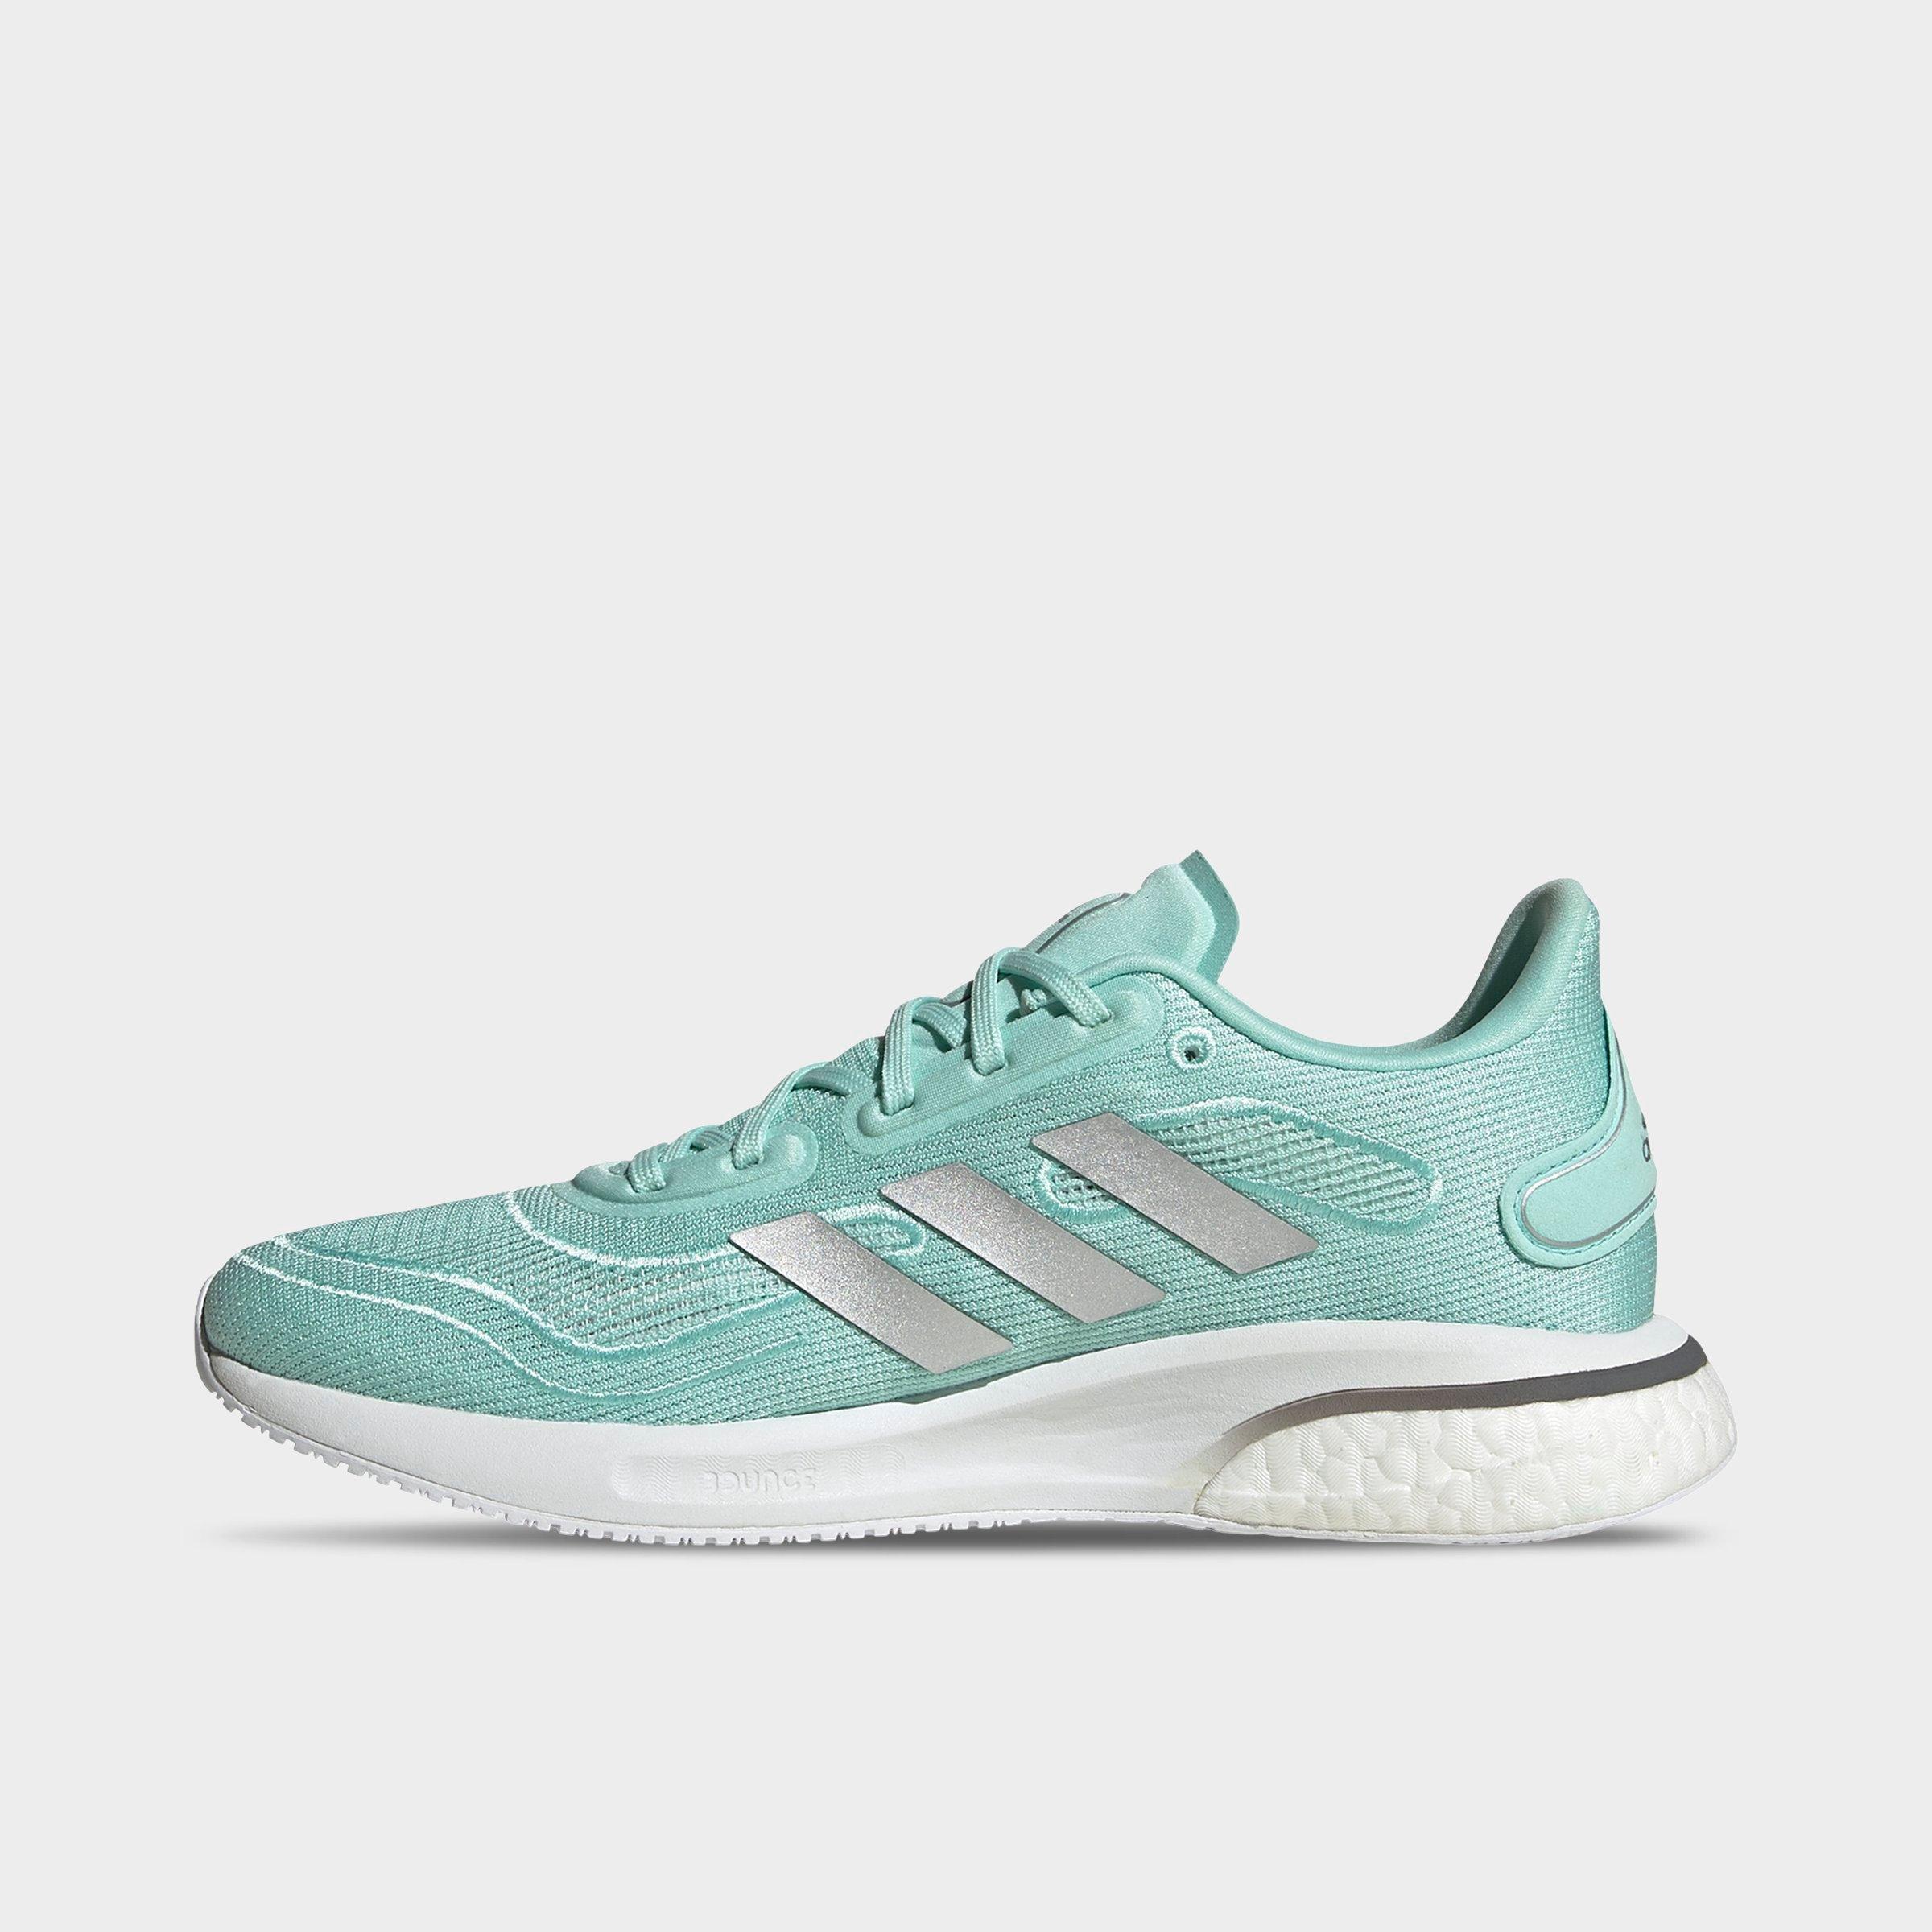 where can i return adidas online purchase in store